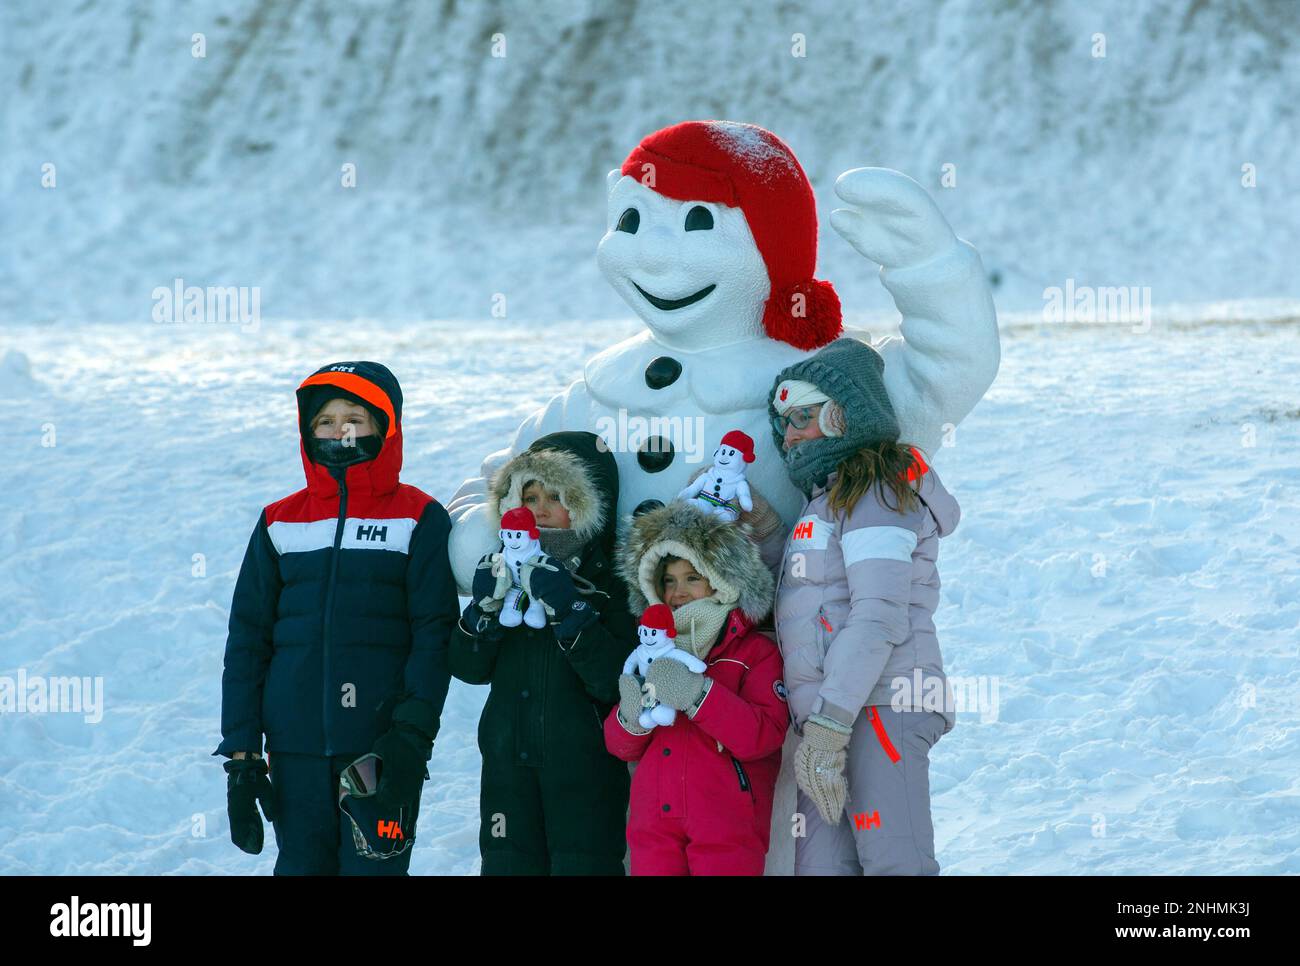 Quebec, Canada : This is the famous King of the Quebec Winter Carnival, a snowman mascot loved by everyone and named Bonhomme Carnaval. Stock Photo